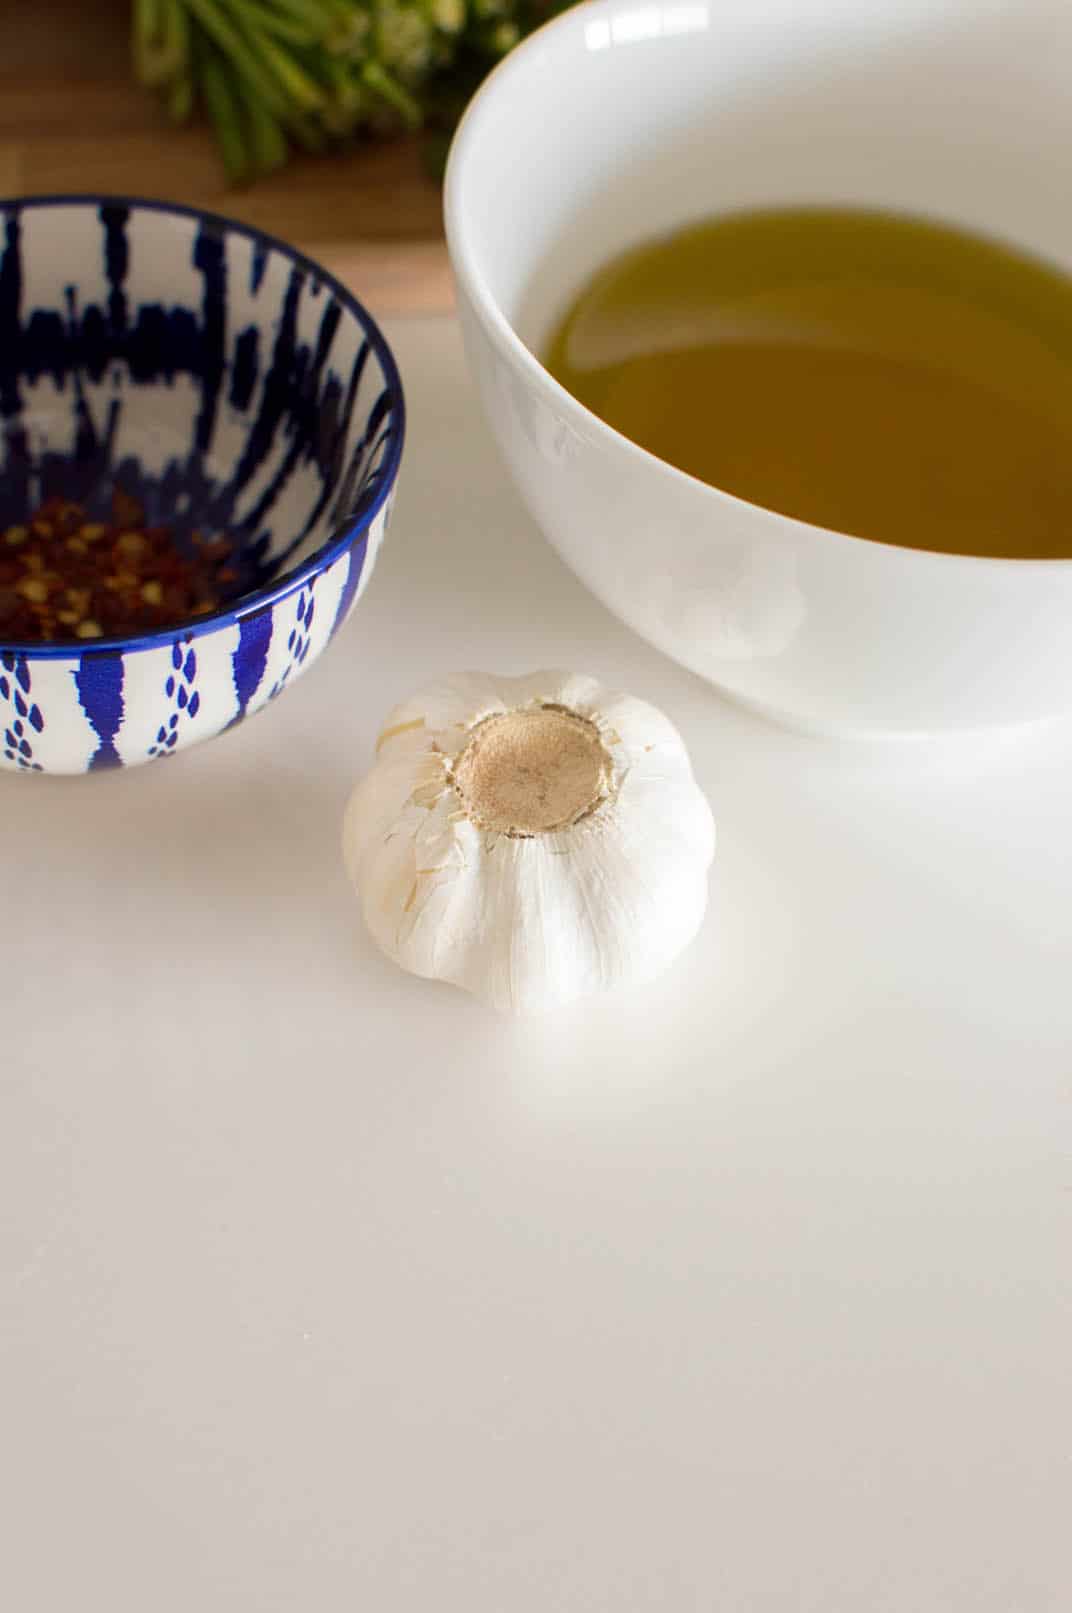 A whole garlic on a white table surrounded by bowls of various ingredients to make easy chimichurri sauce